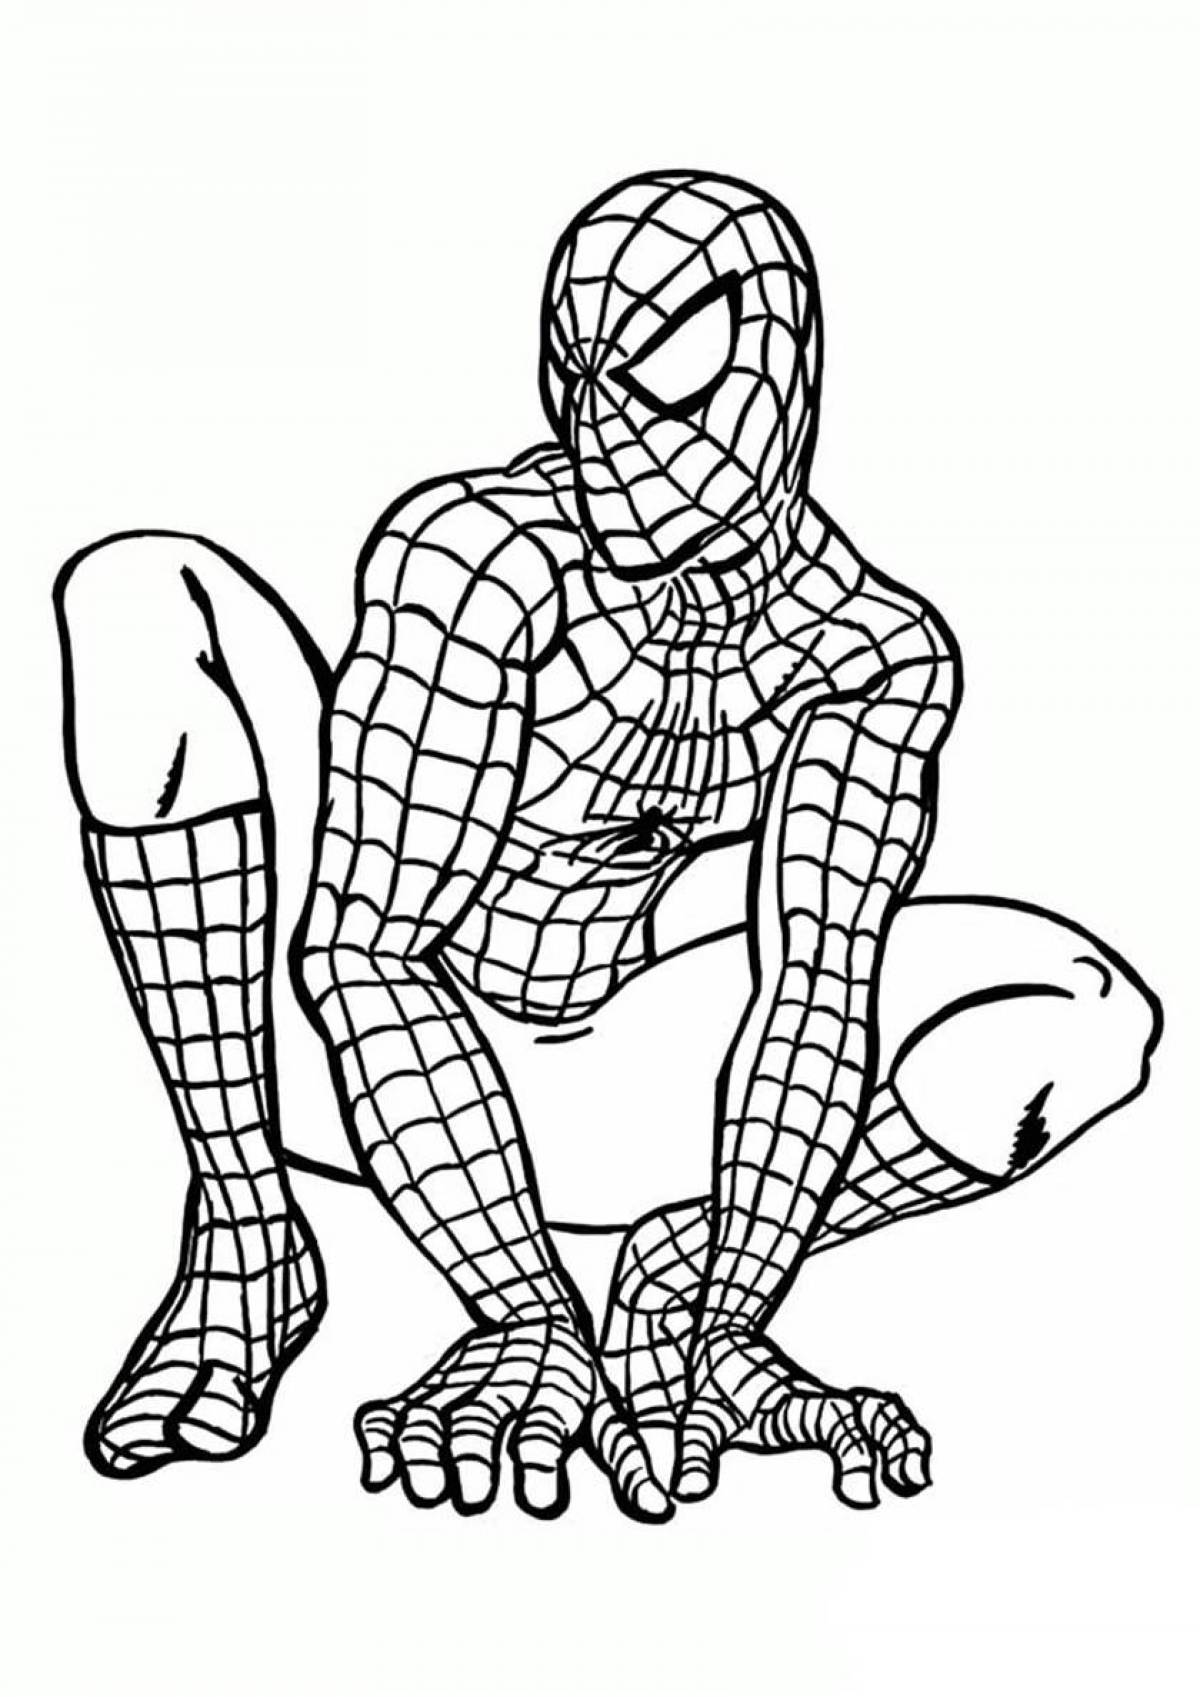 Colorful spiderman coloring book